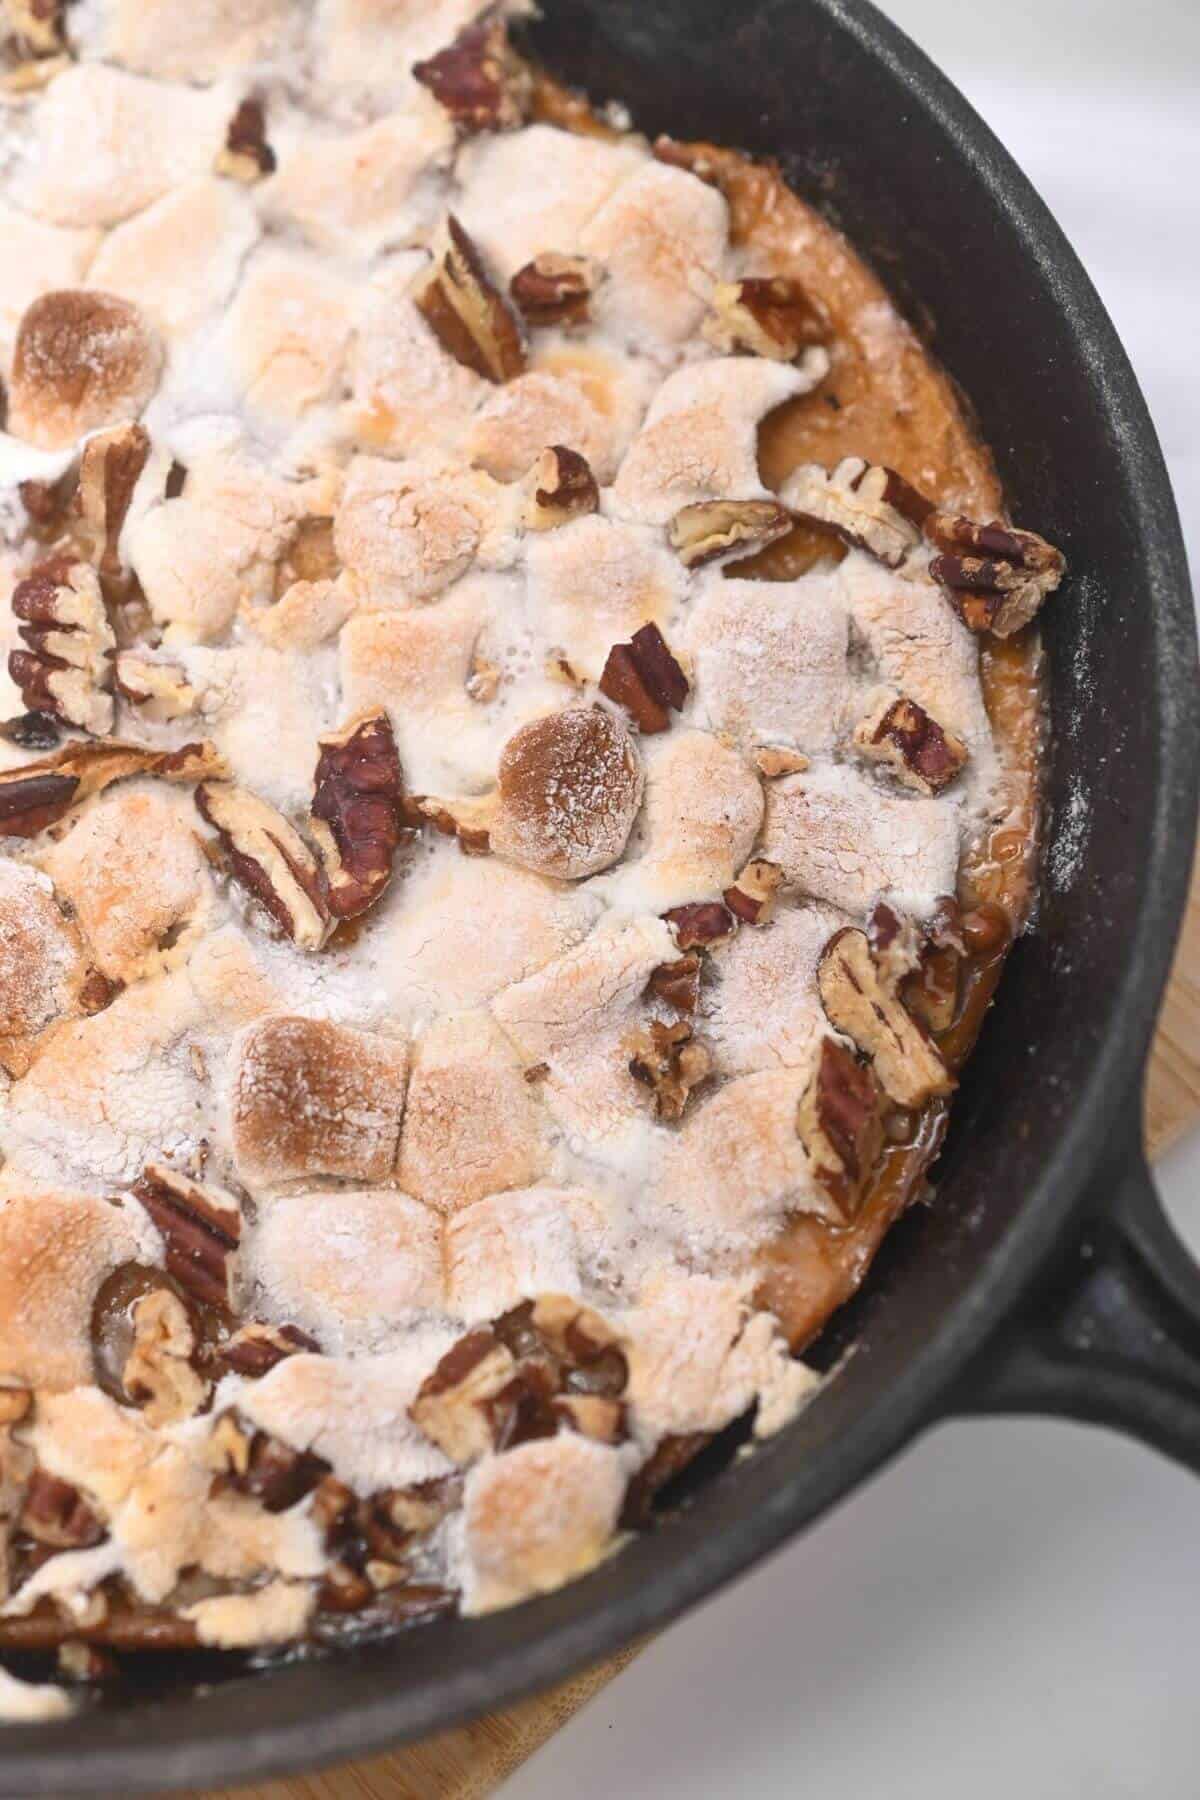 A skillet filled with sweet potato casserole and pecans.